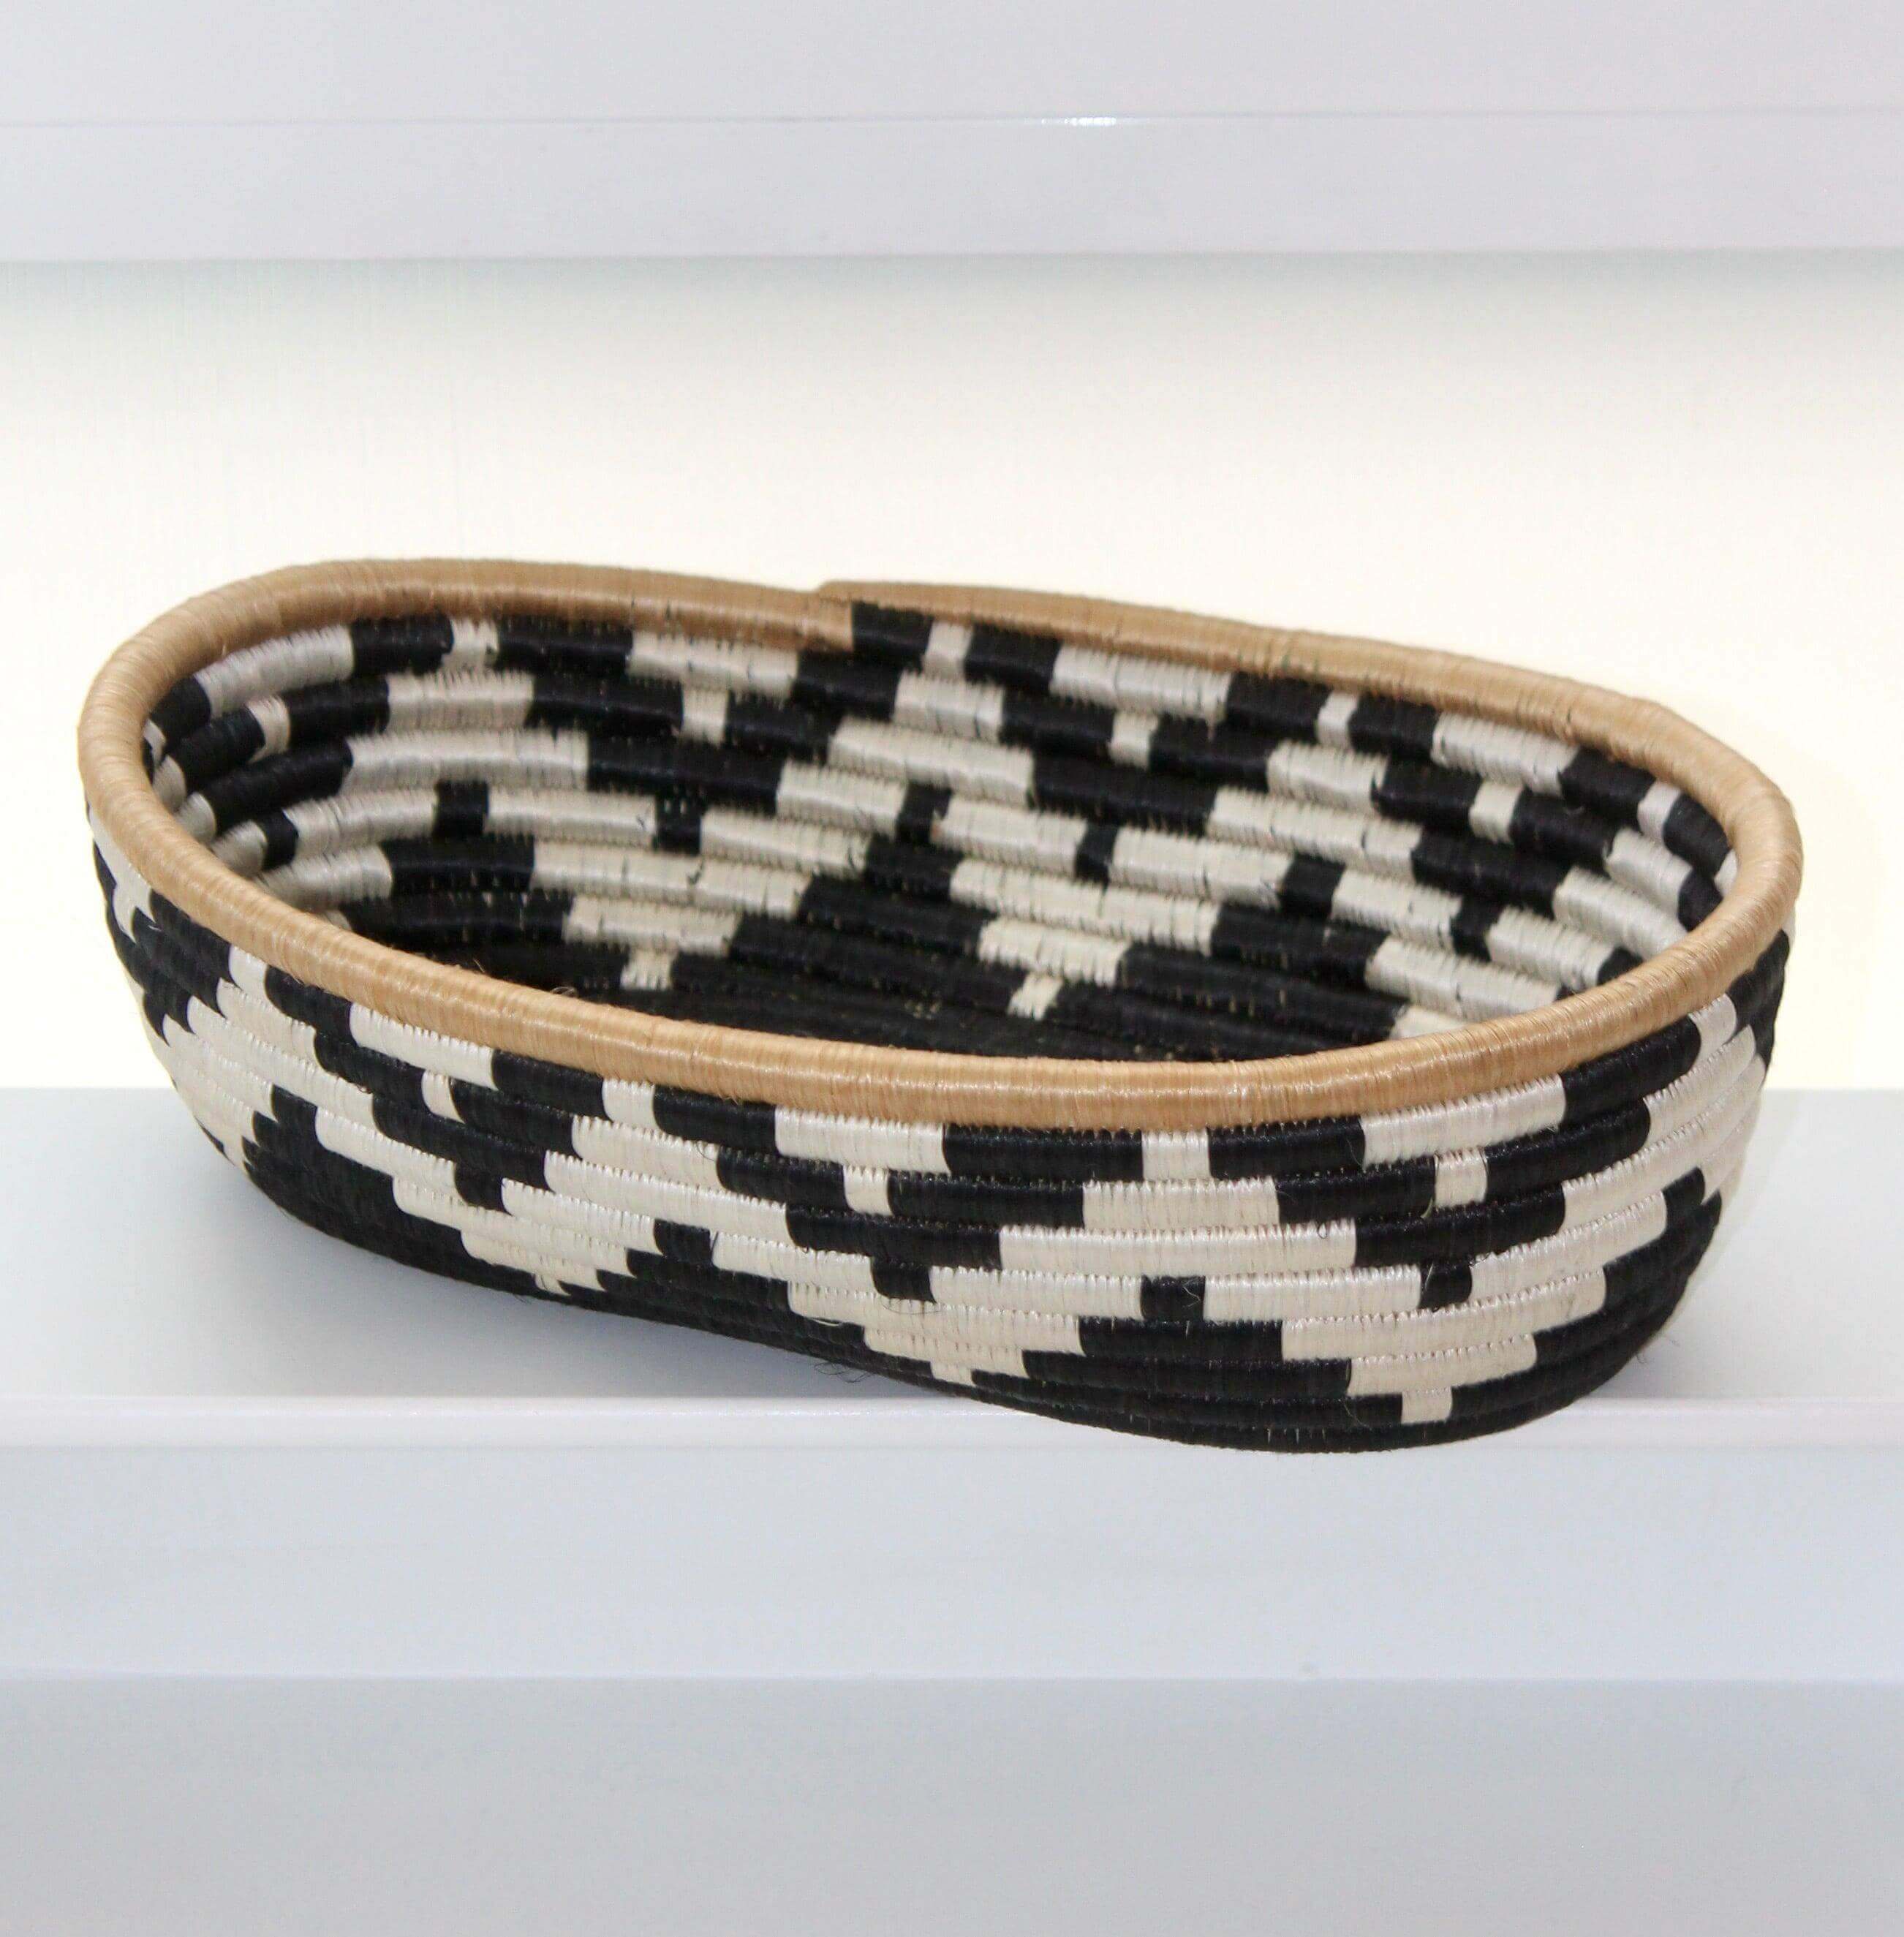 Black and white woven bread basket